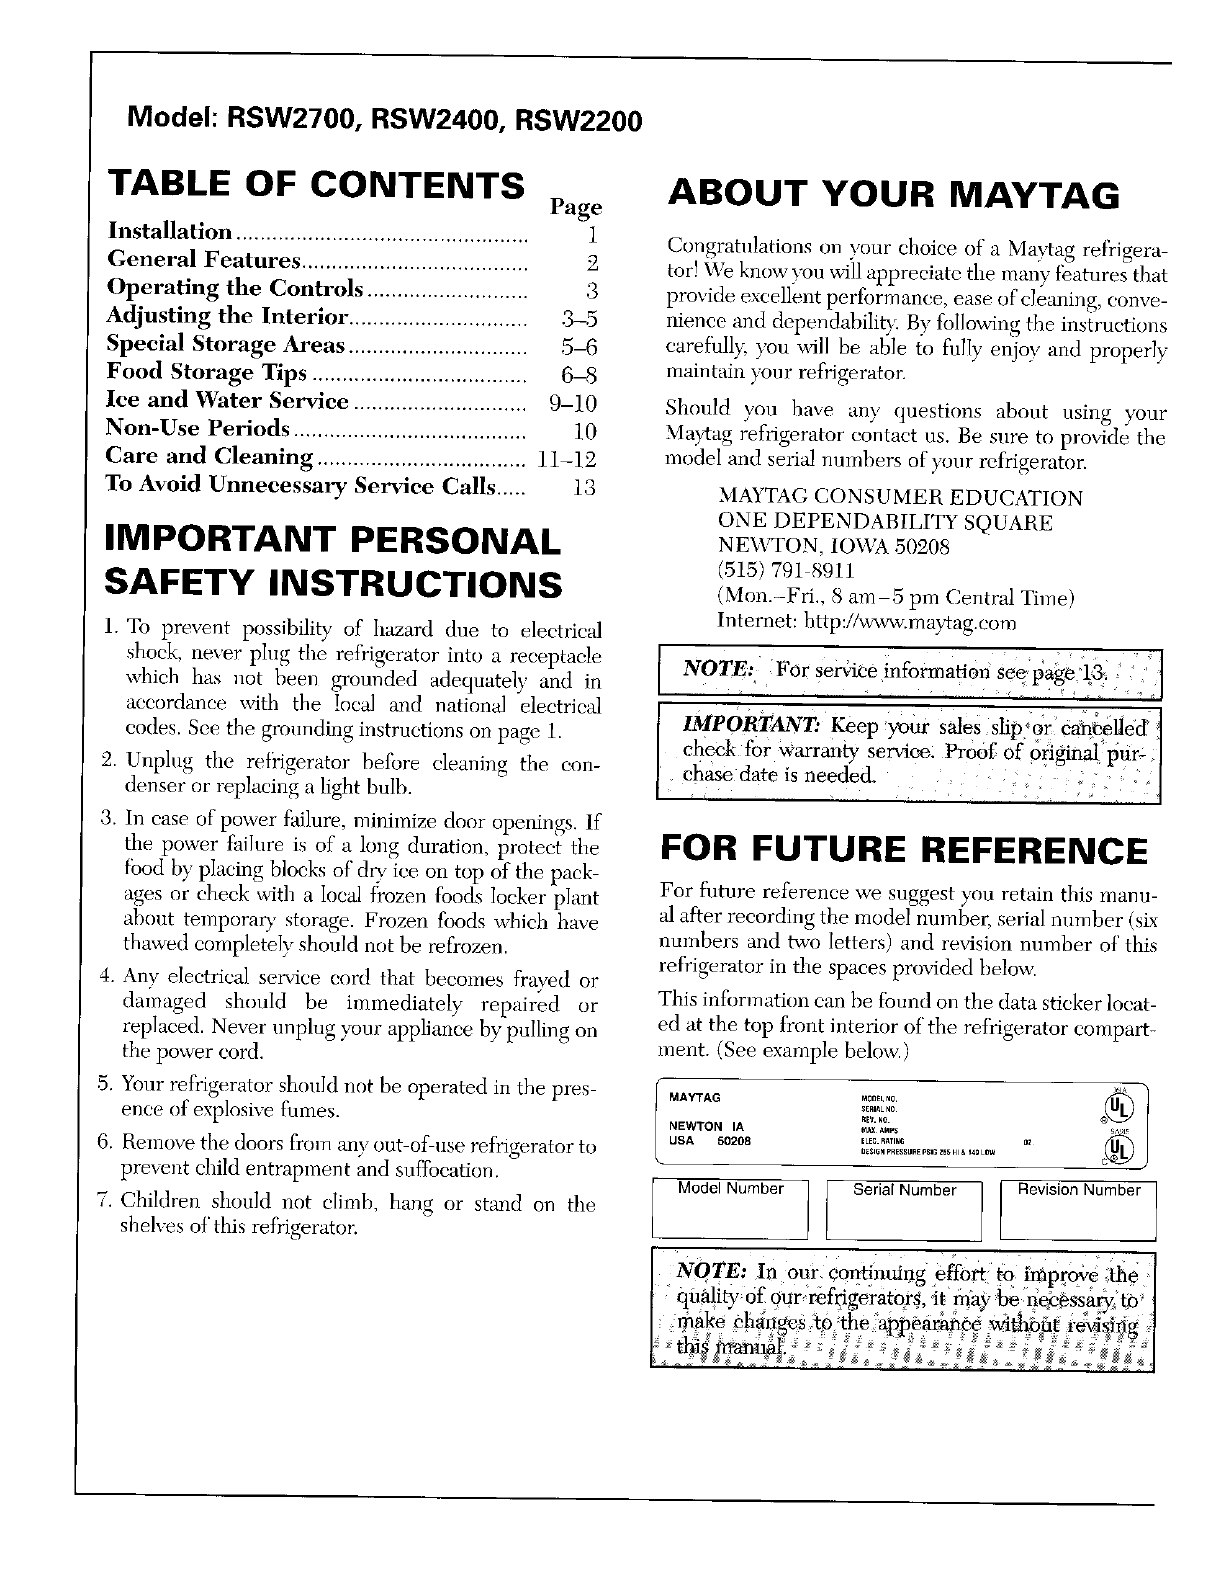 Owners manual for maytag refrigerator